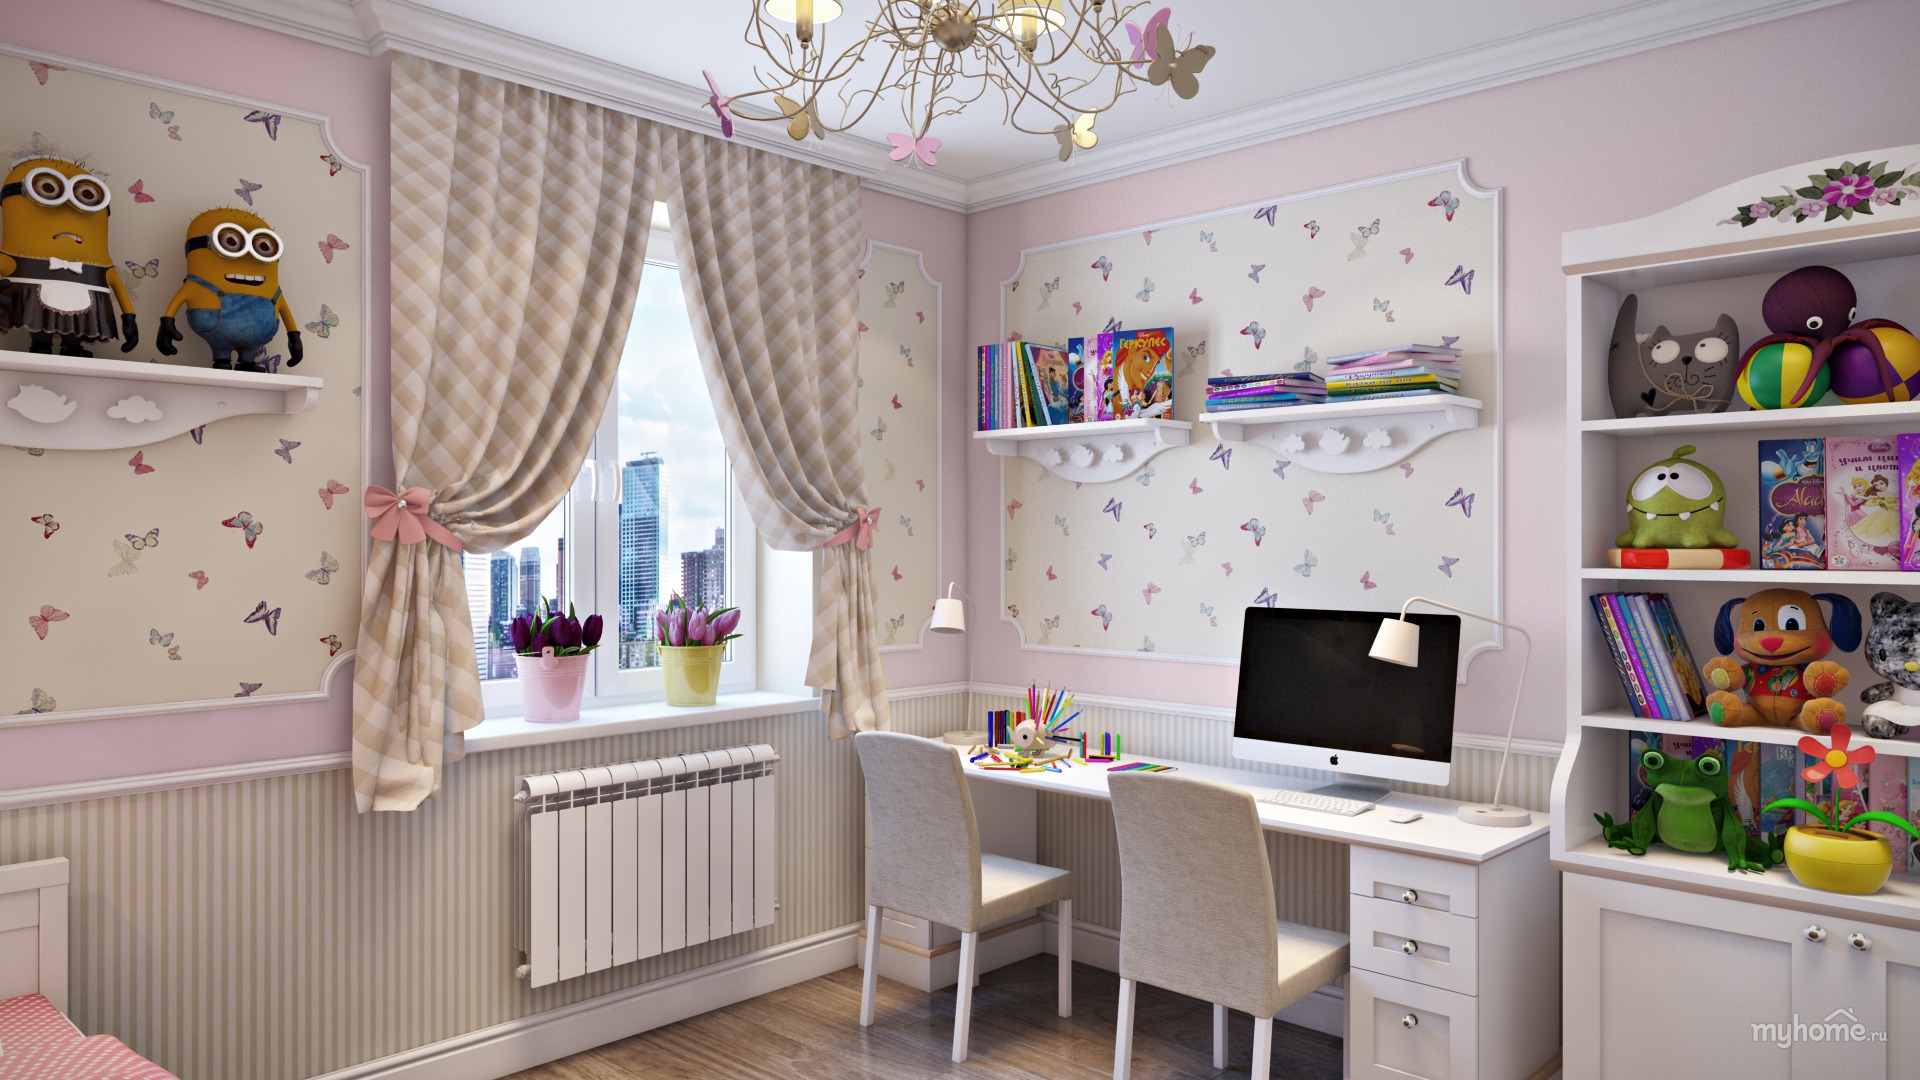 Design project of light wallpaper for a girls room